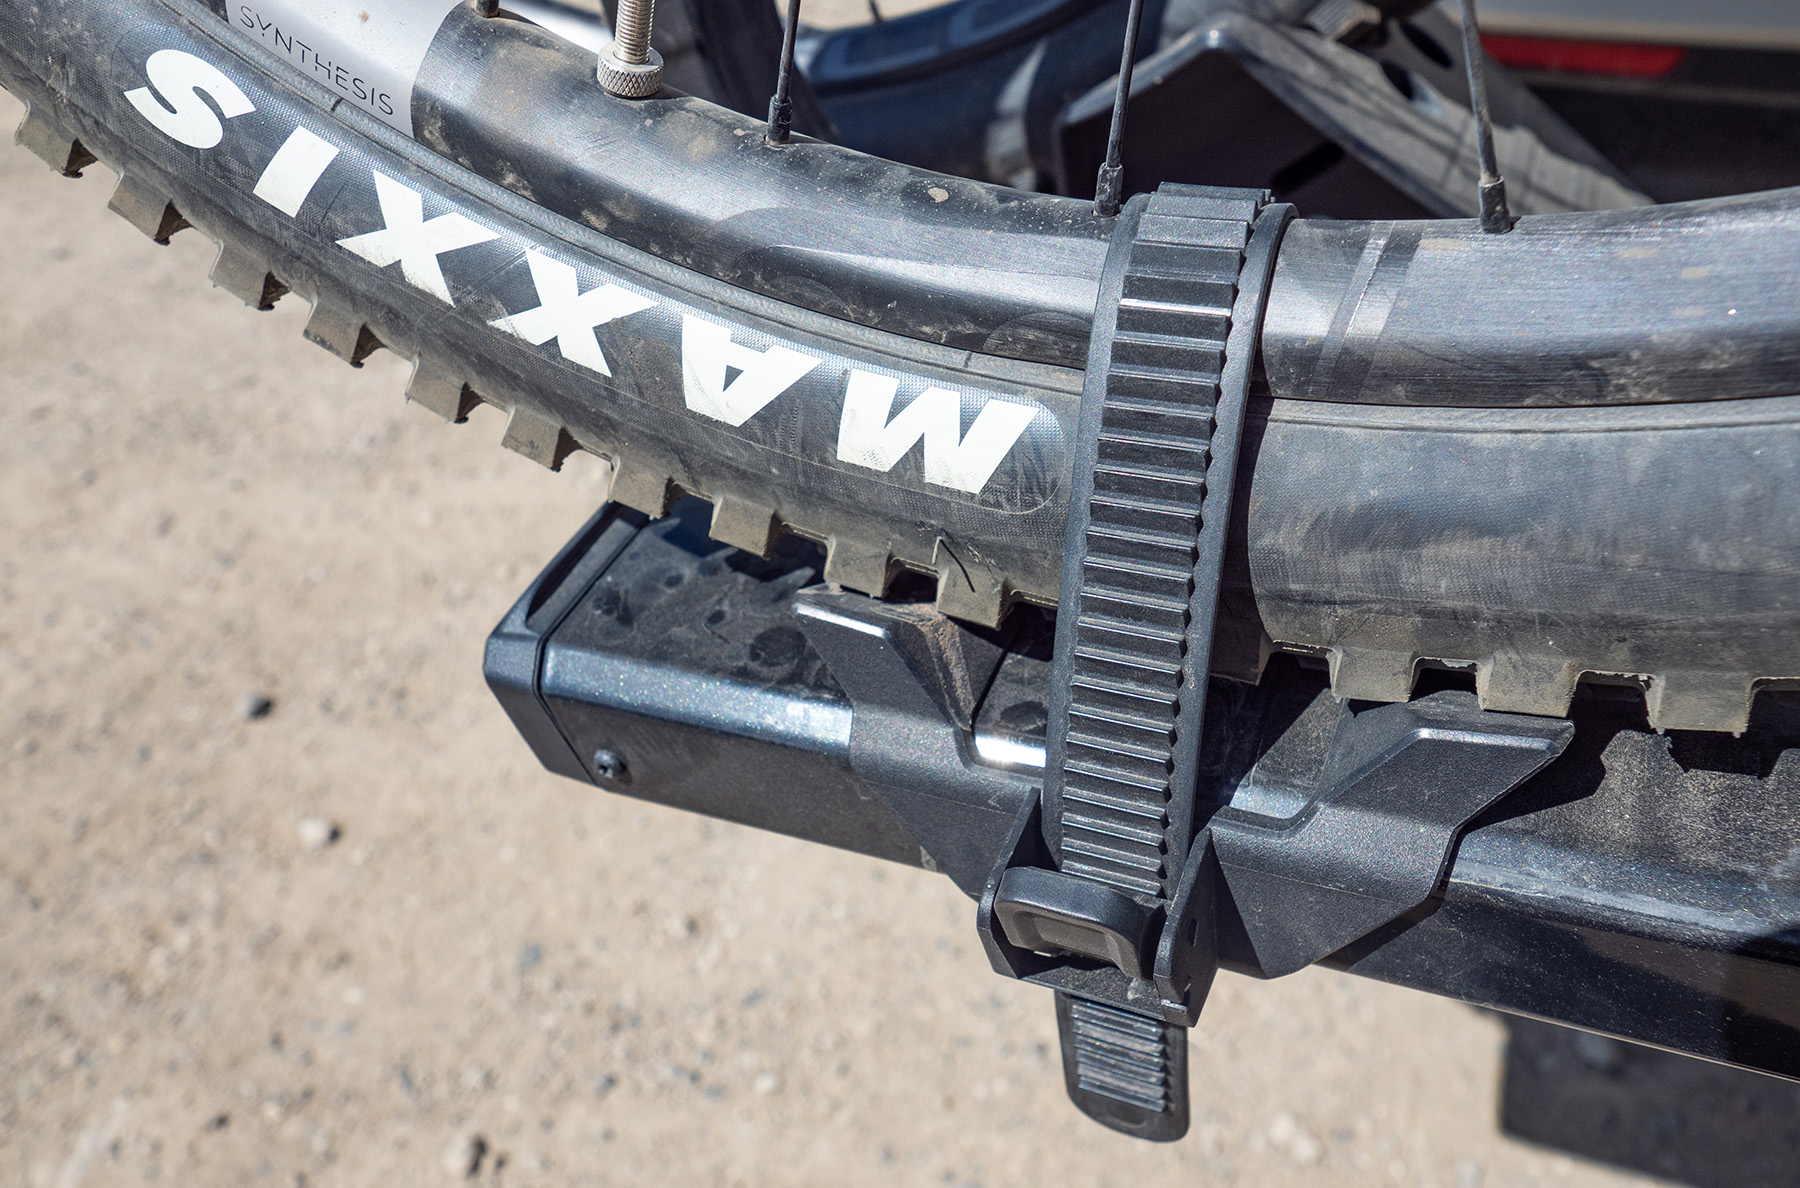 Dylan Wood reviews the Yakima StageTwo for Blister